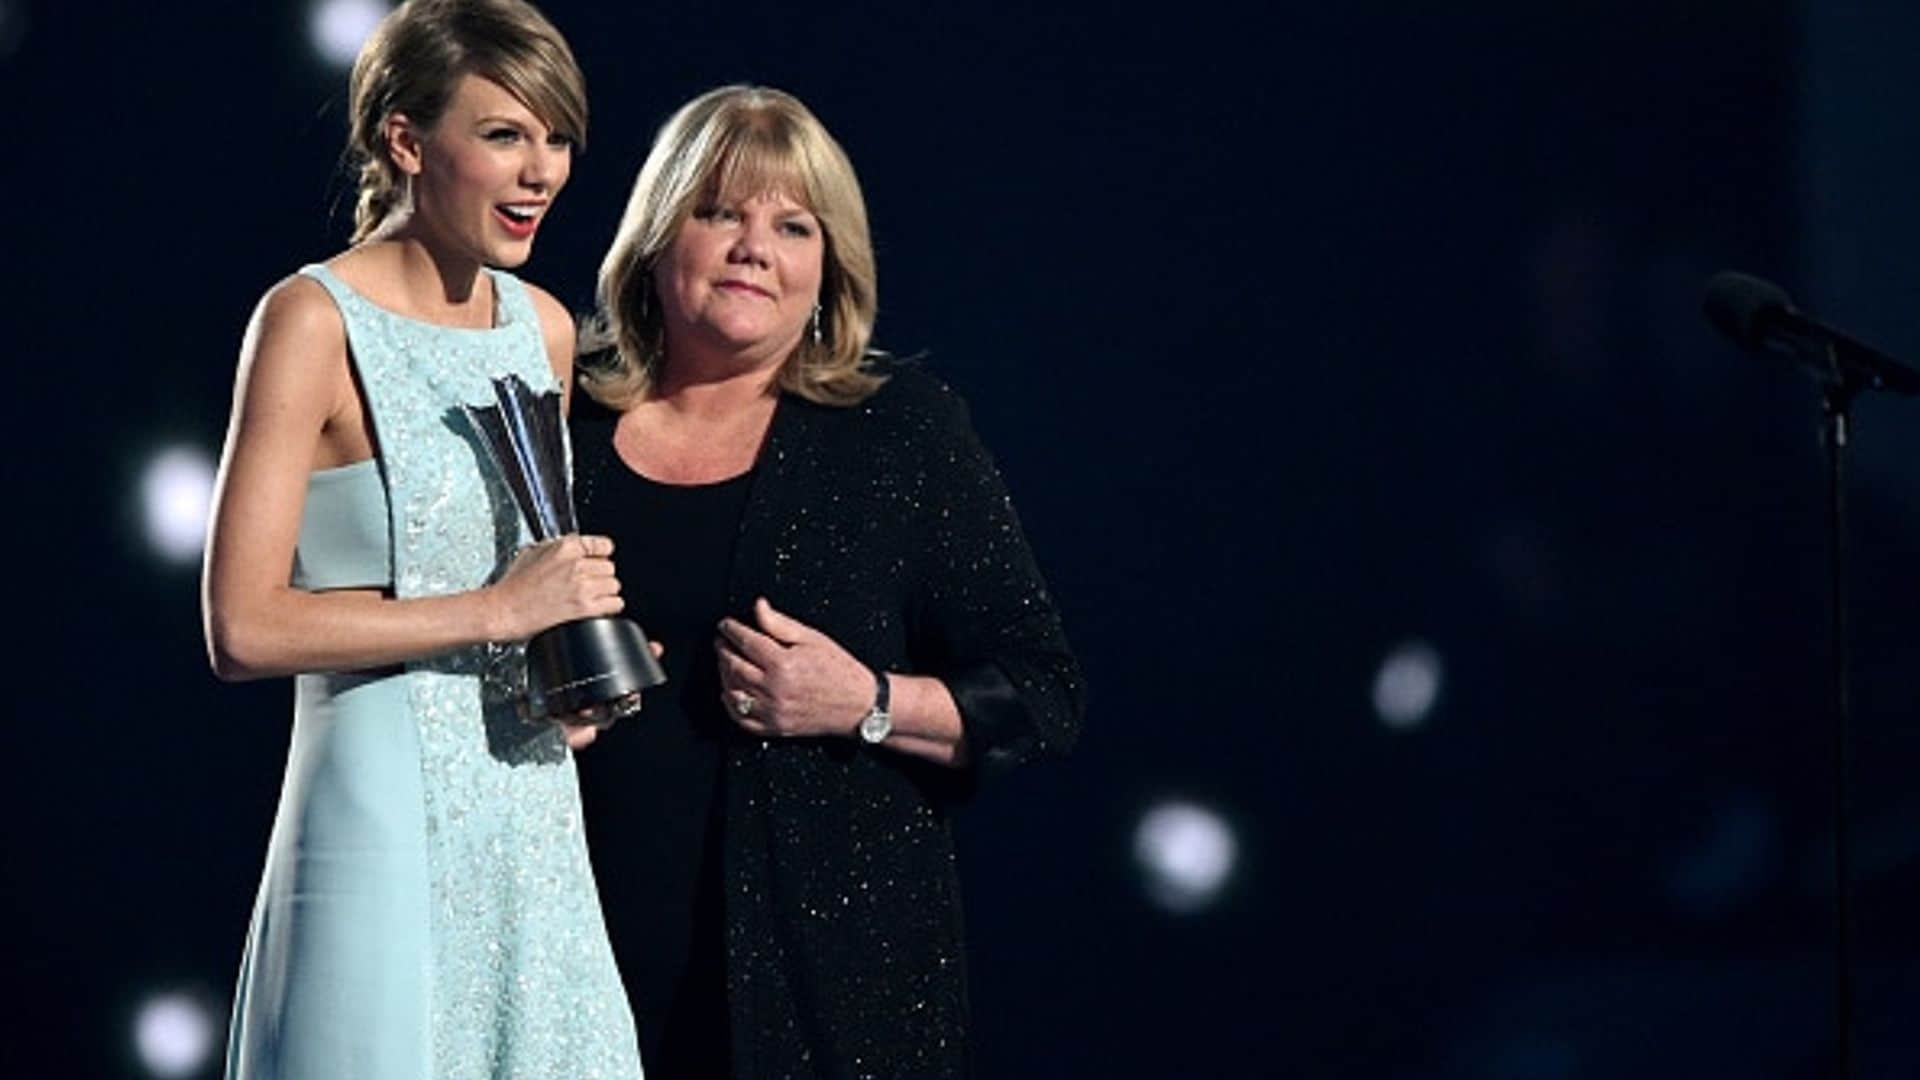 Taylor Swift's mom gives emotional speech at Academy of Country Music Awards